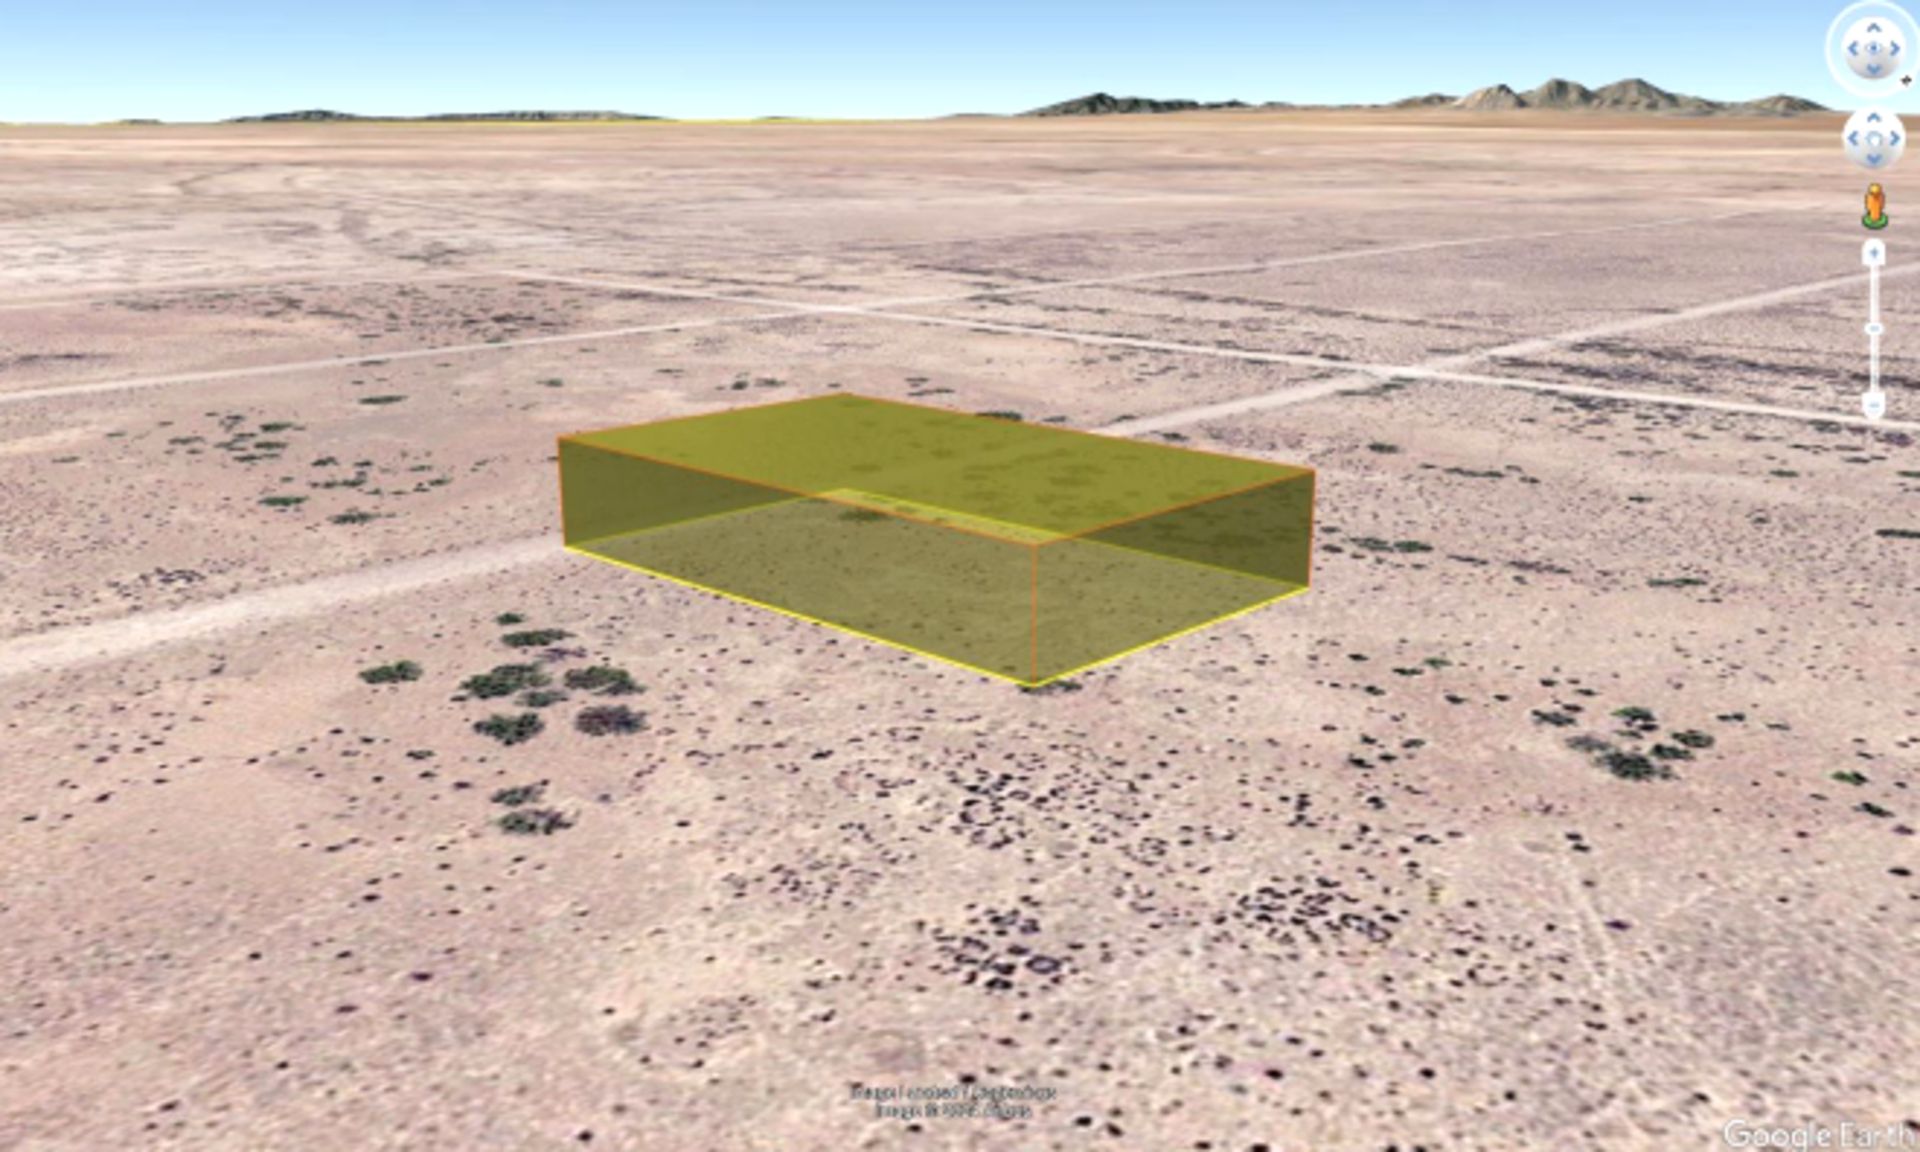 Half an Acre in Luna County, New Mexico! - Image 3 of 15